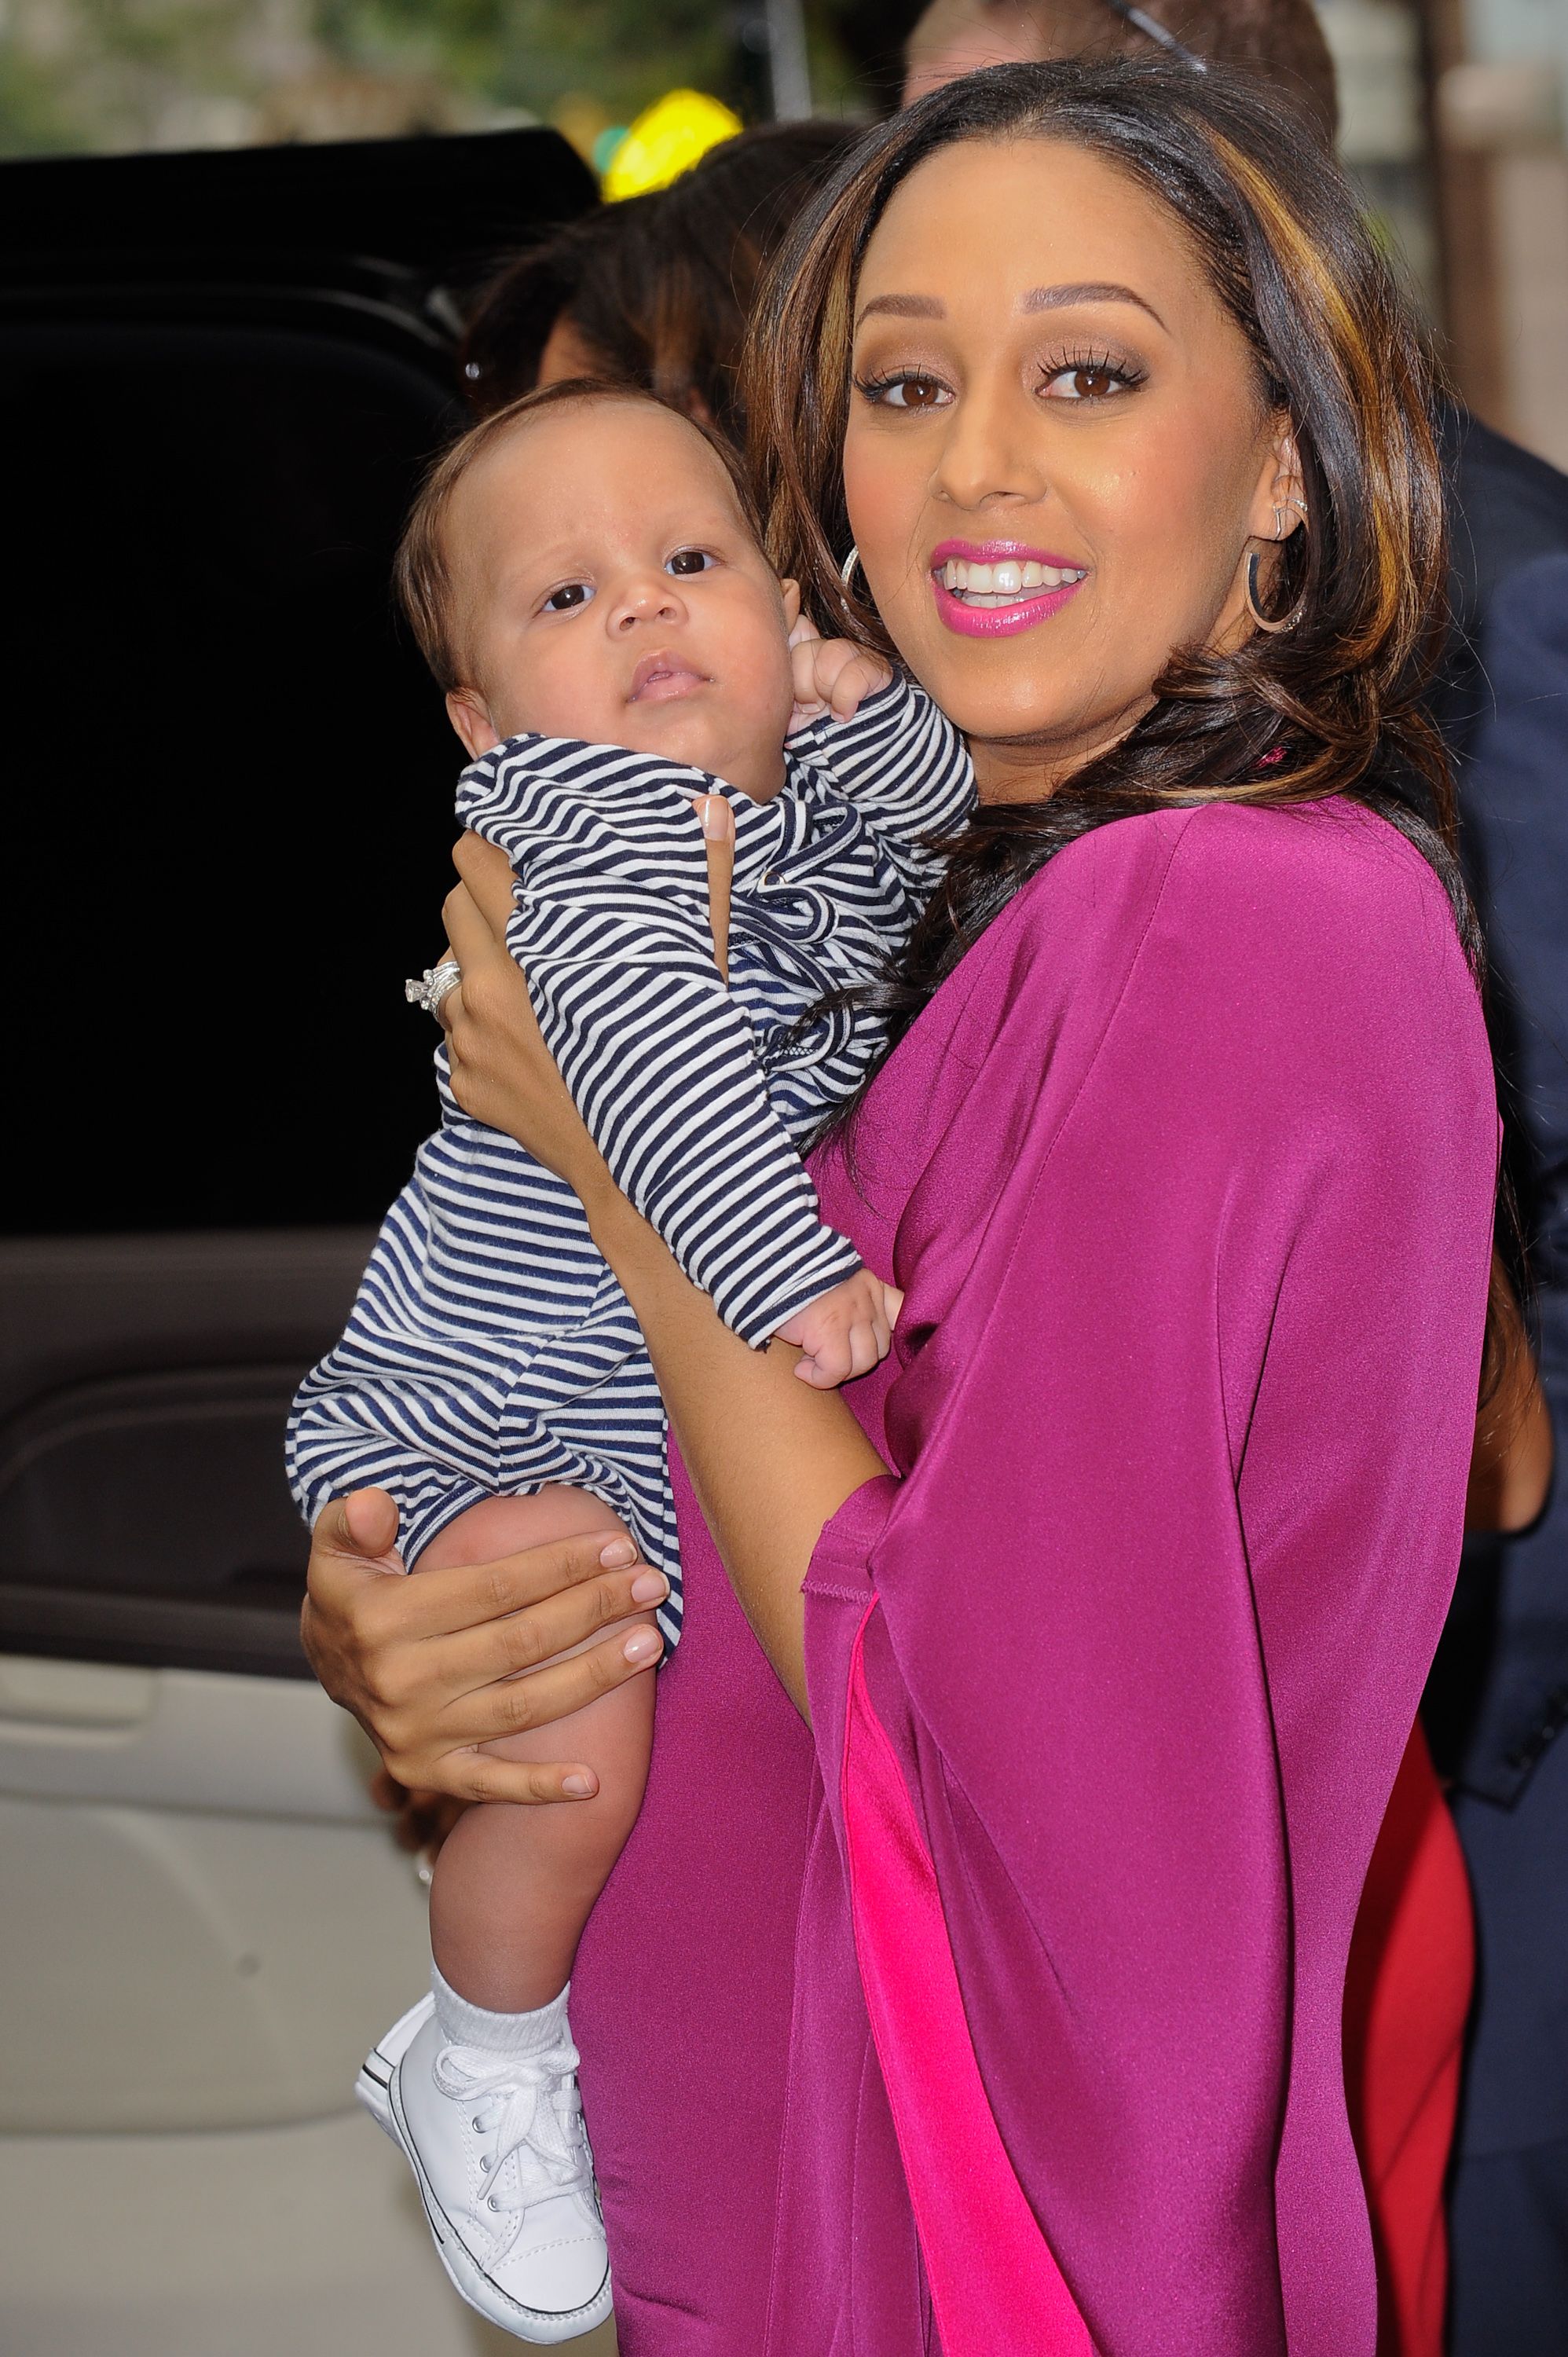 Actress Tia Mowry and her son Cree Hardrict,2011| Photo: Getty Images